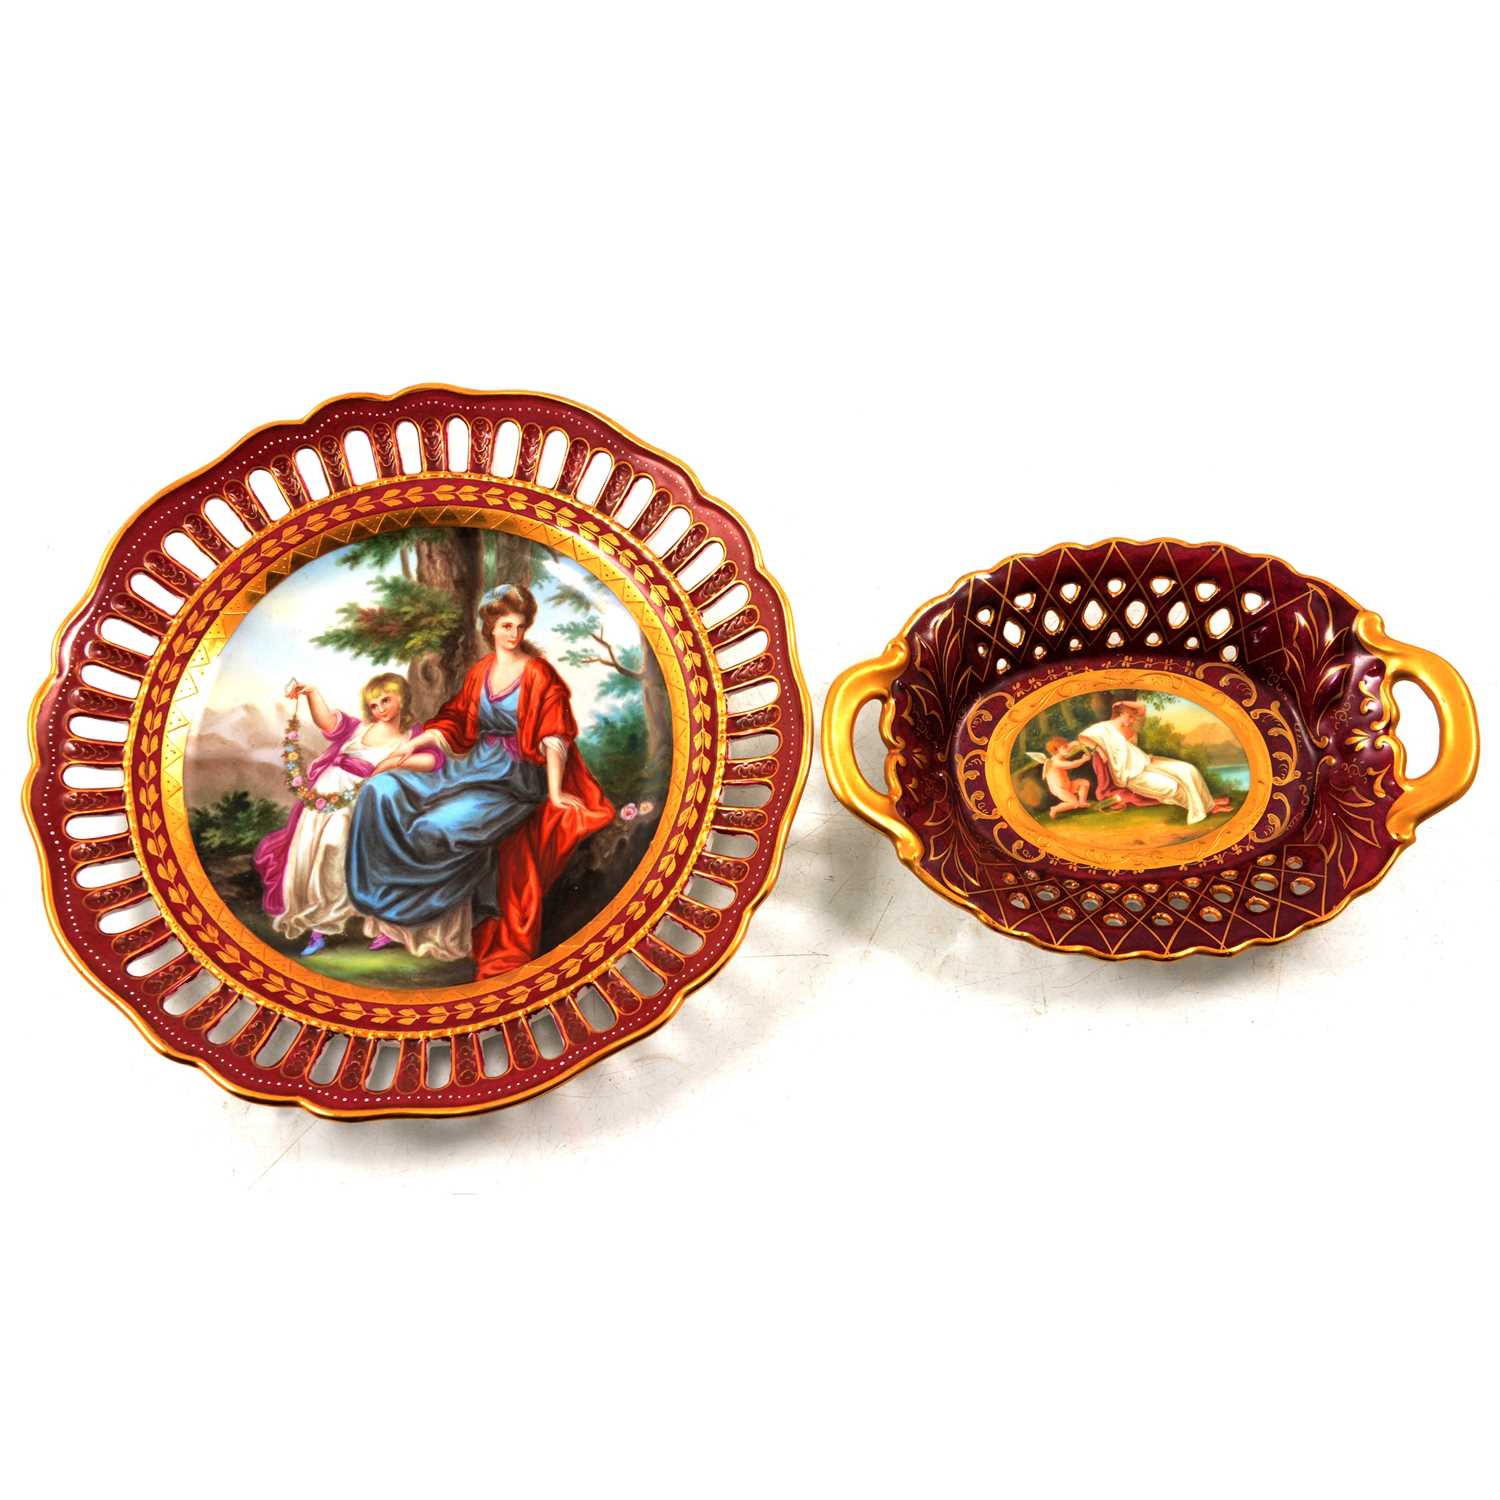 Lot 22 - A hand-painted Royal Vienna plate and dish